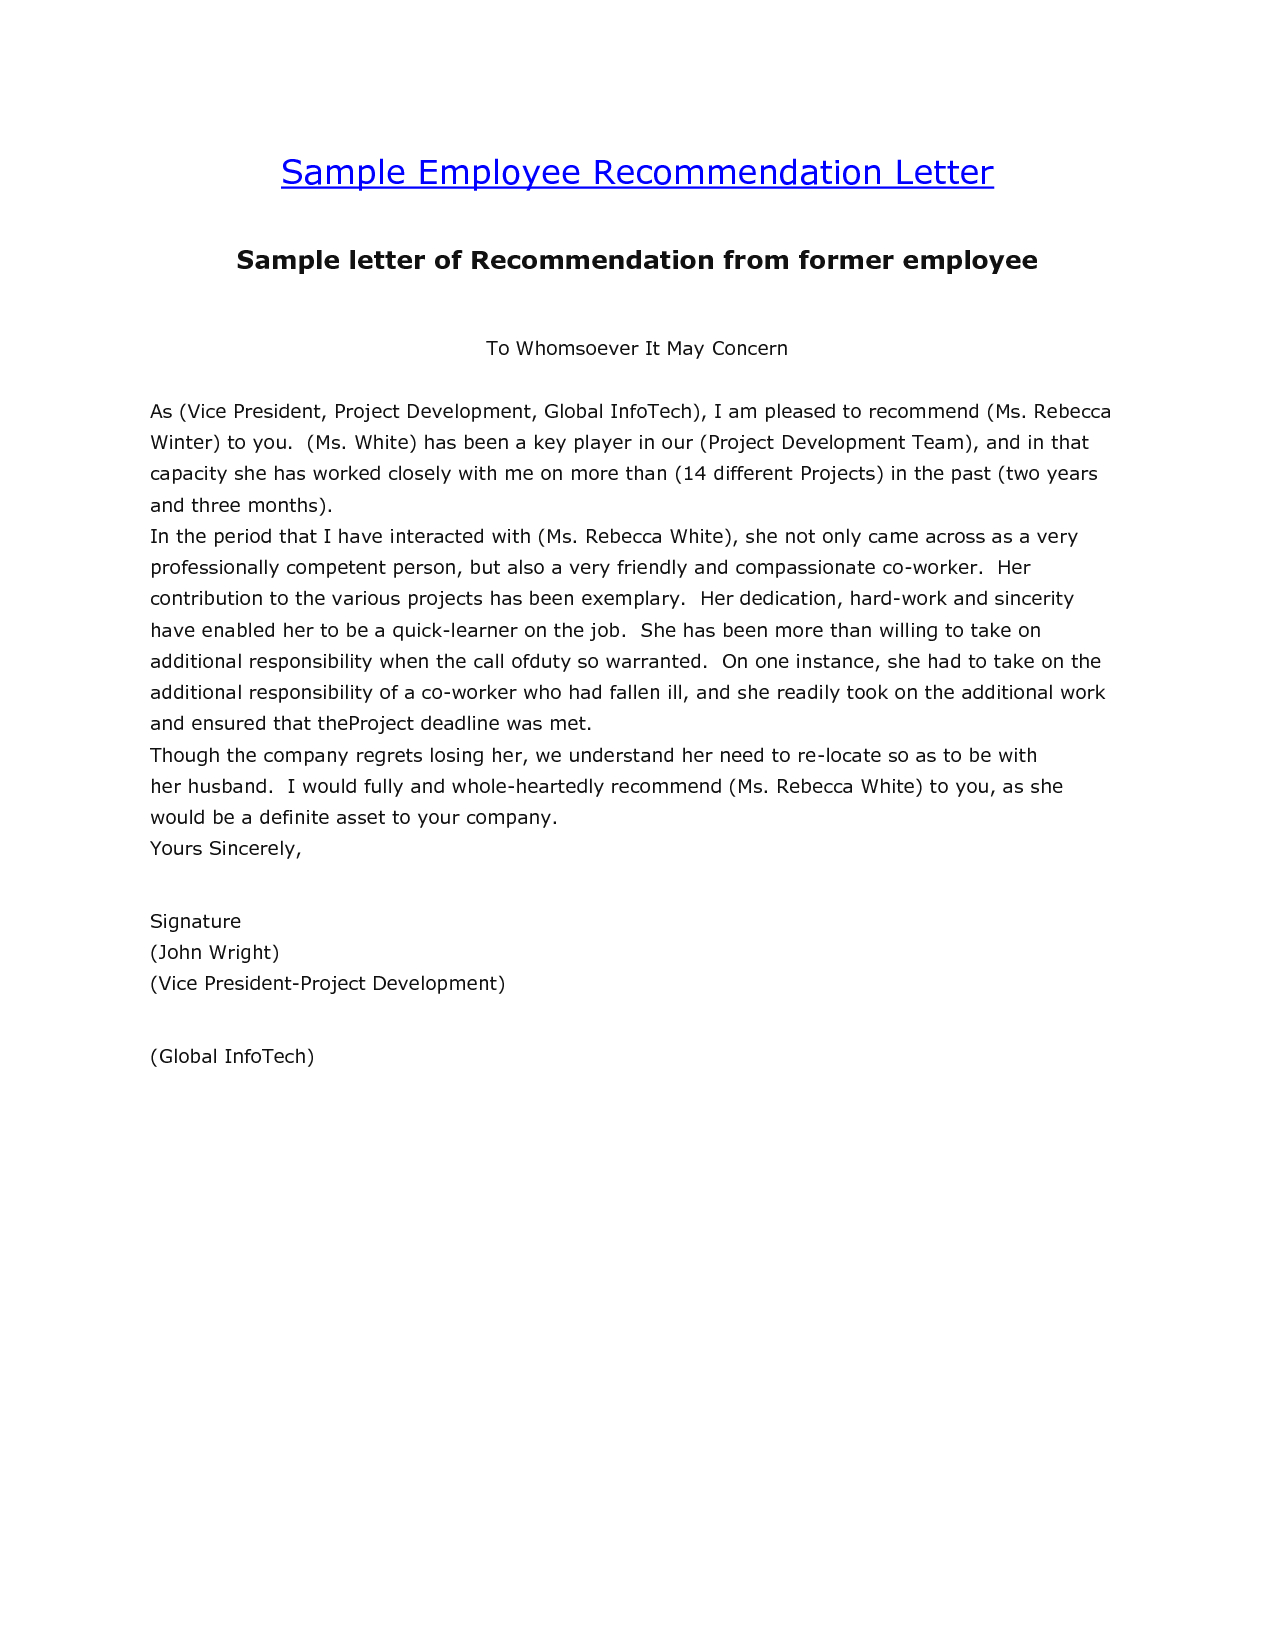 Fresh Sample Recommendation Letter For Employee Download inside measurements 1275 X 1650